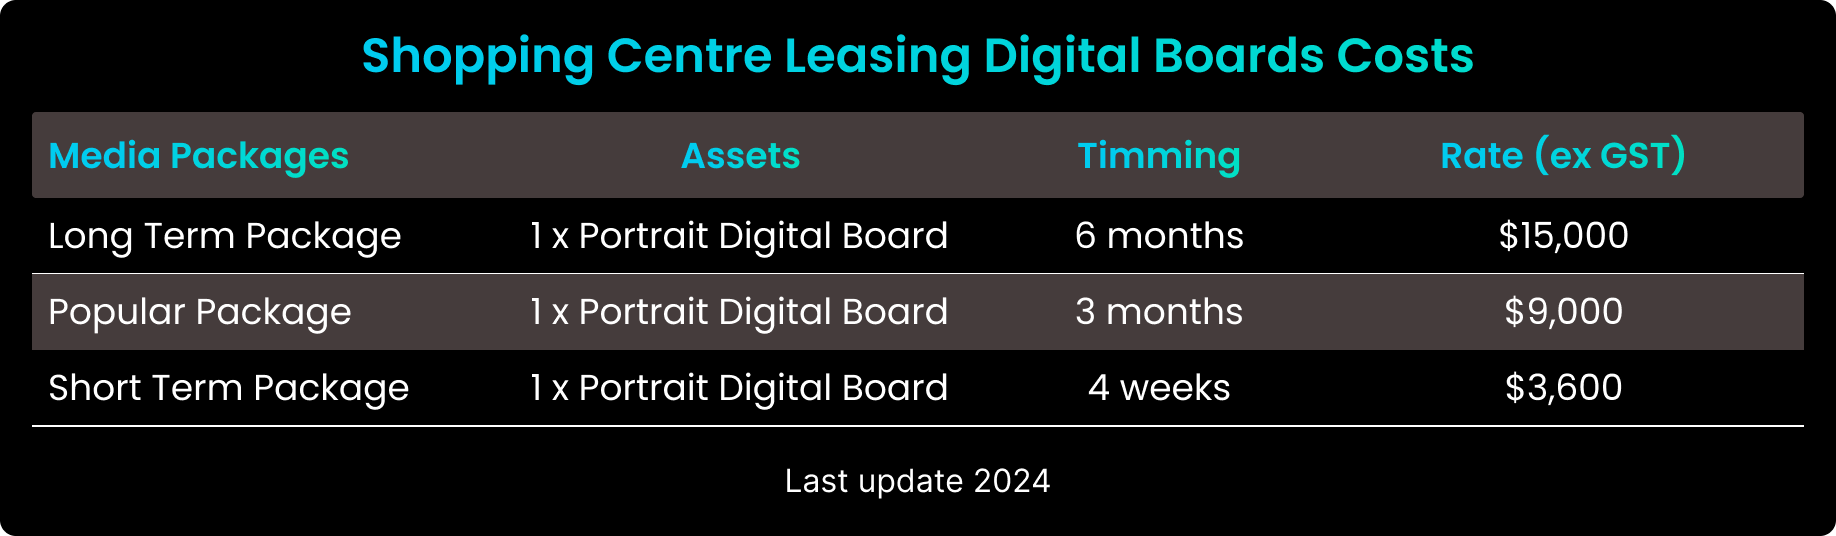 shopping centre leasing costs for digital boards